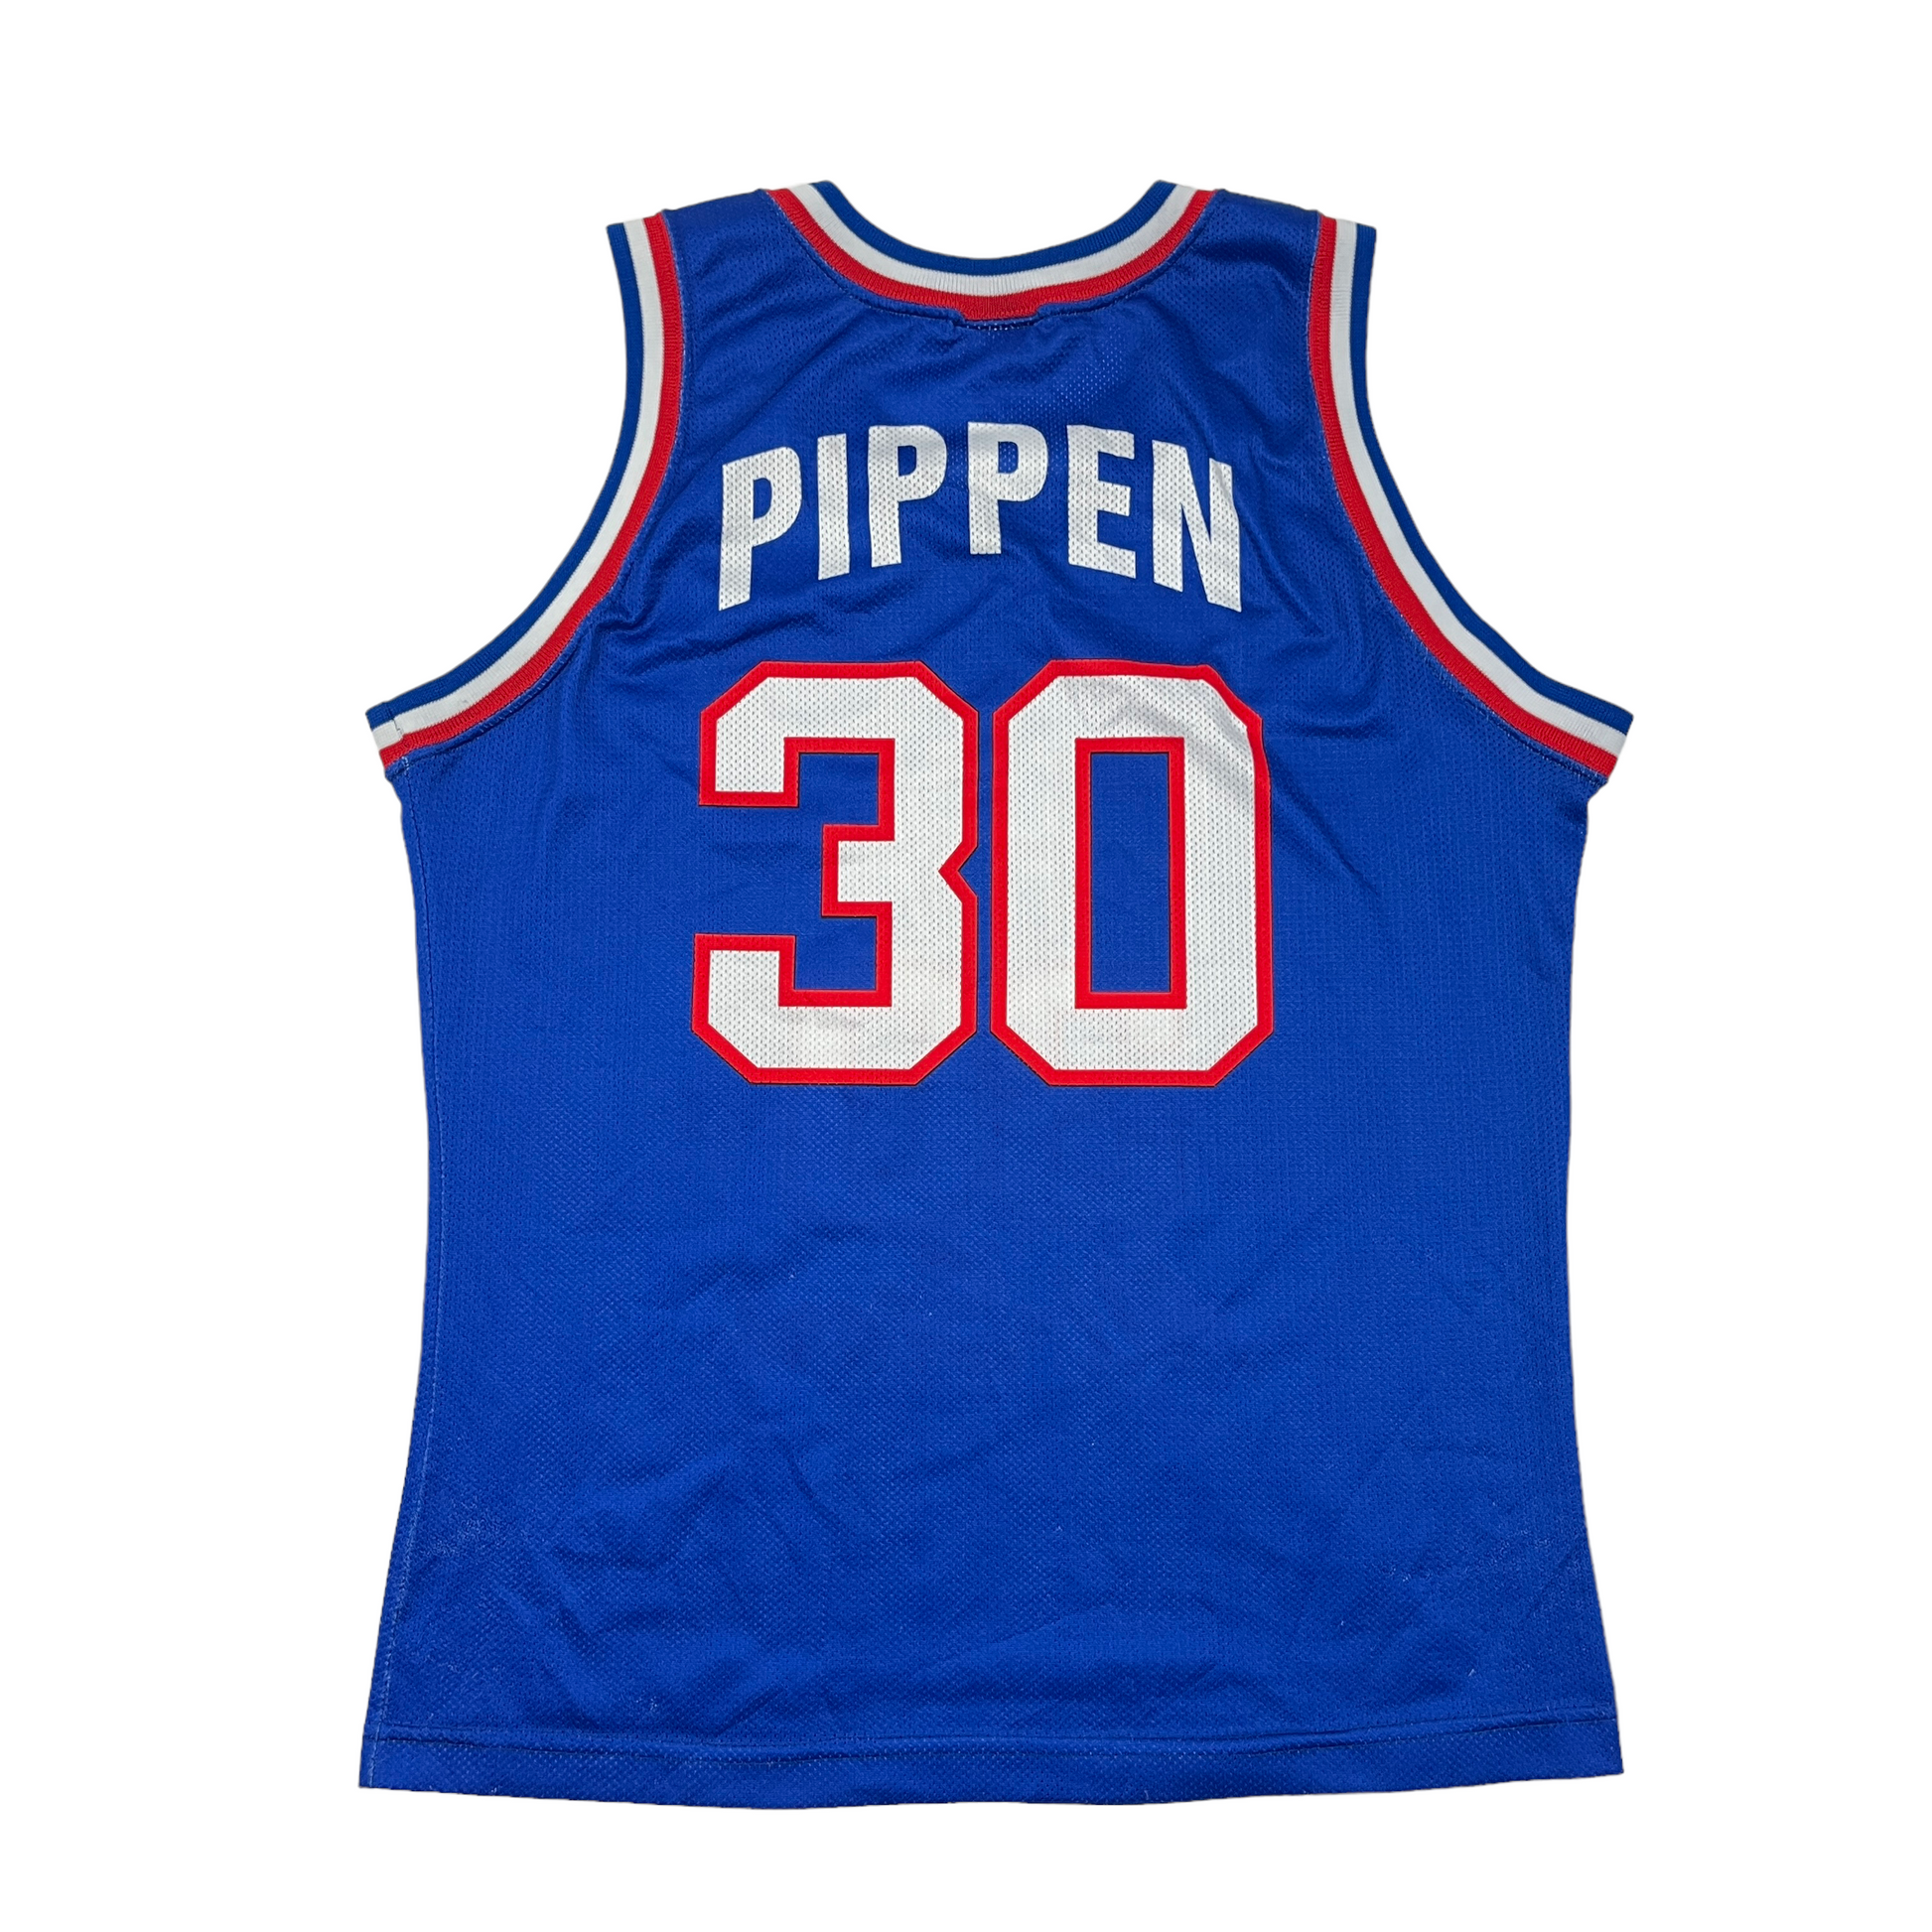 Men's Mitchell & Ness Scottie Pippen White Eastern Conference Hardwood  Classics 1992 NBA All-Star Game Swingman Jersey